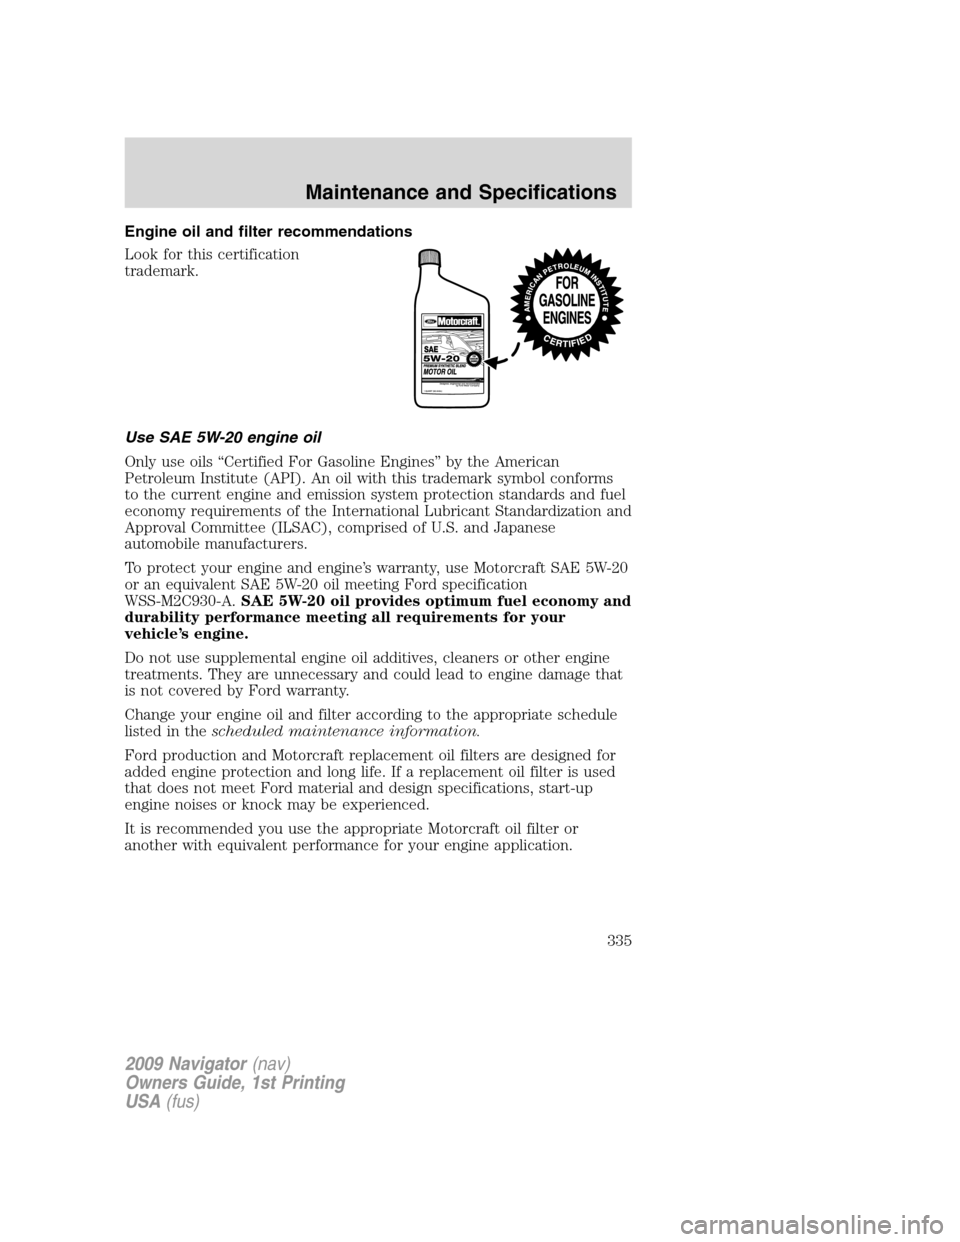 LINCOLN NAVIGATOR 2009  Owners Manual Engine oil and filter recommendations
Look for this certification
trademark.
Use SAE 5W-20 engine oil
Only use oils “Certified For Gasoline Engines” by the American
Petroleum Institute (API). An o